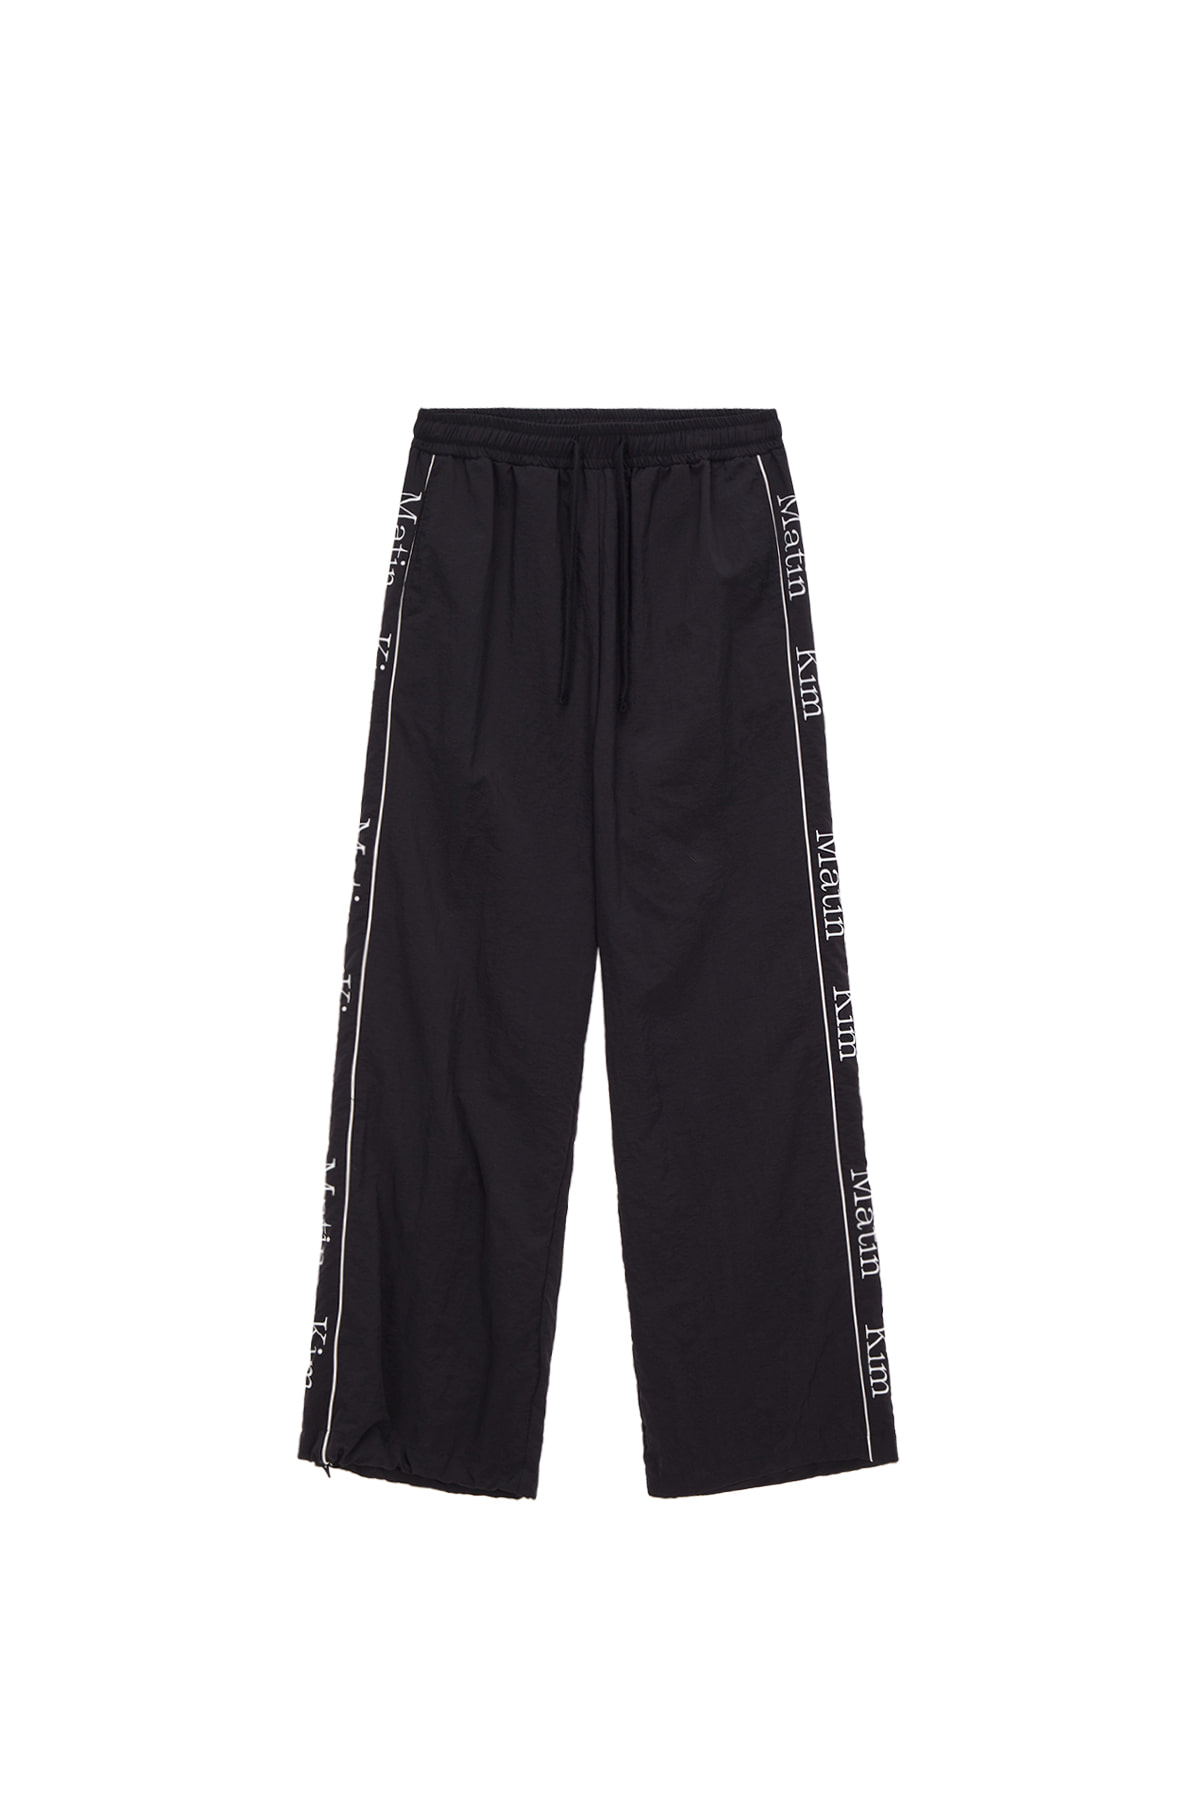 MATIN SPELL TRACK PANTS IN BLACK